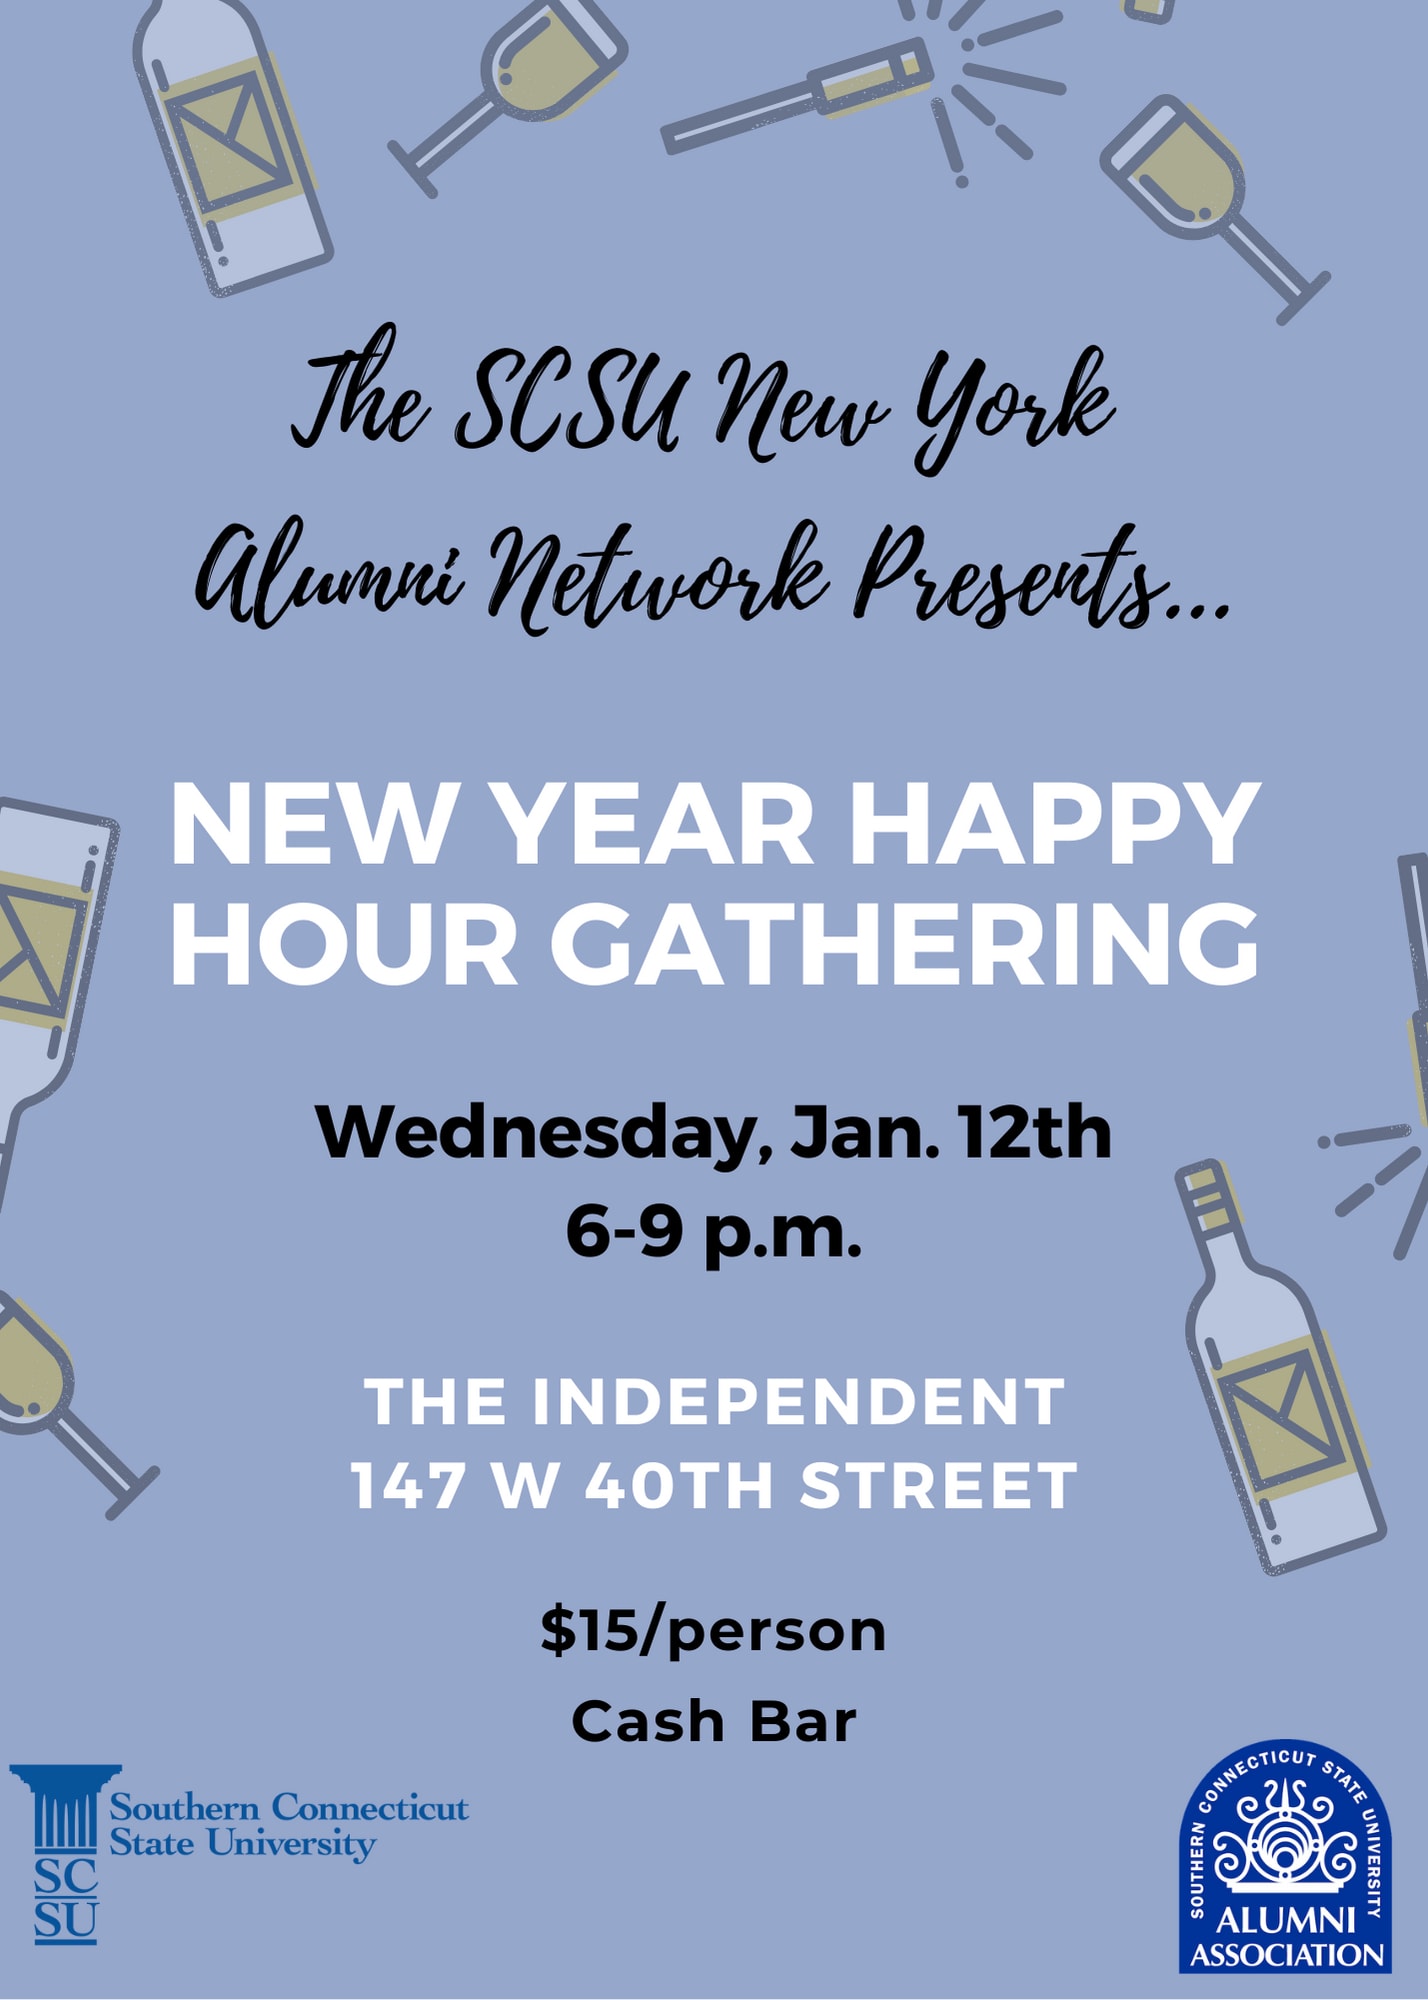 The SCSU New York Alumni Network Presents: NEW YEAR HAPPY HOUR GATHERING.  Wednesday, January 12, 2022  6:oo  pm - 9:00 pm  The INdependent   147 40th Street